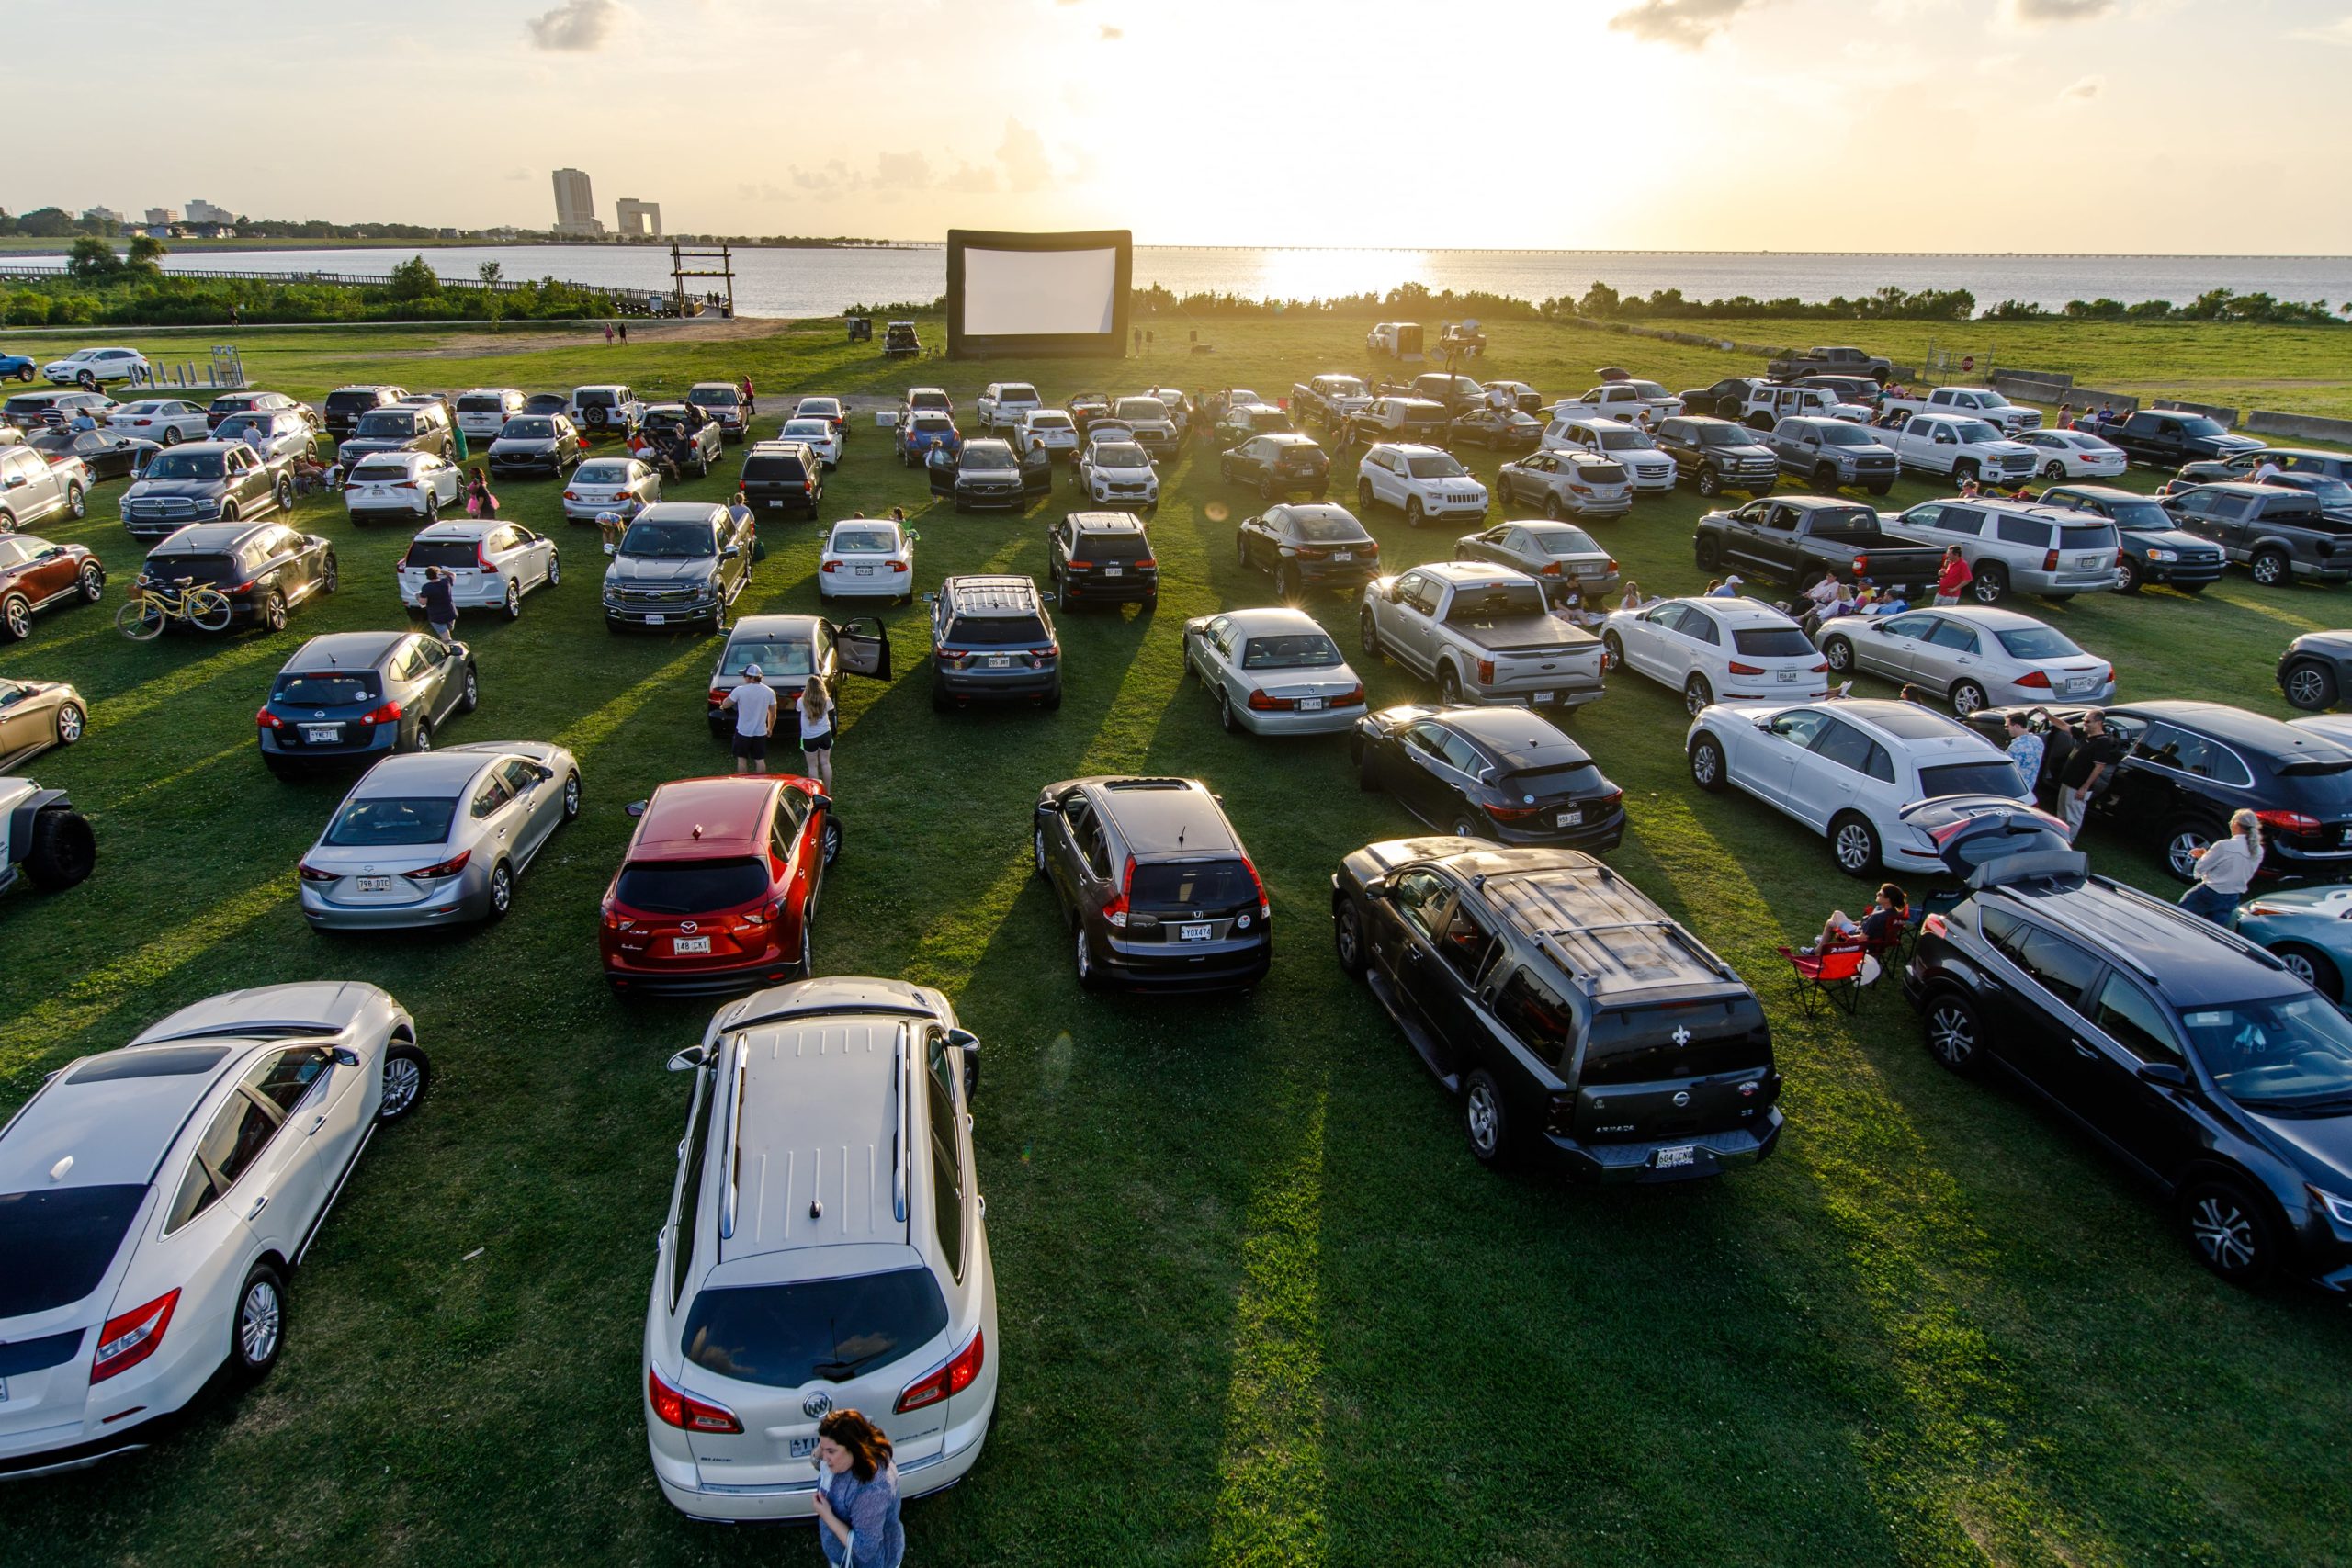 METAIRIE, LOUISIANA - MAY 22: Attendees arrive to watch the movie "Grease" at a pop-up drive-in theatre at Bucktown Marina Park on May 22, 2020 in Metairie, Louisiana. With indoor theaters in many places still closed due to coronavirus, drive-in theaters have seen a rise in attendance. (Photo by Josh Brasted/Getty Images)